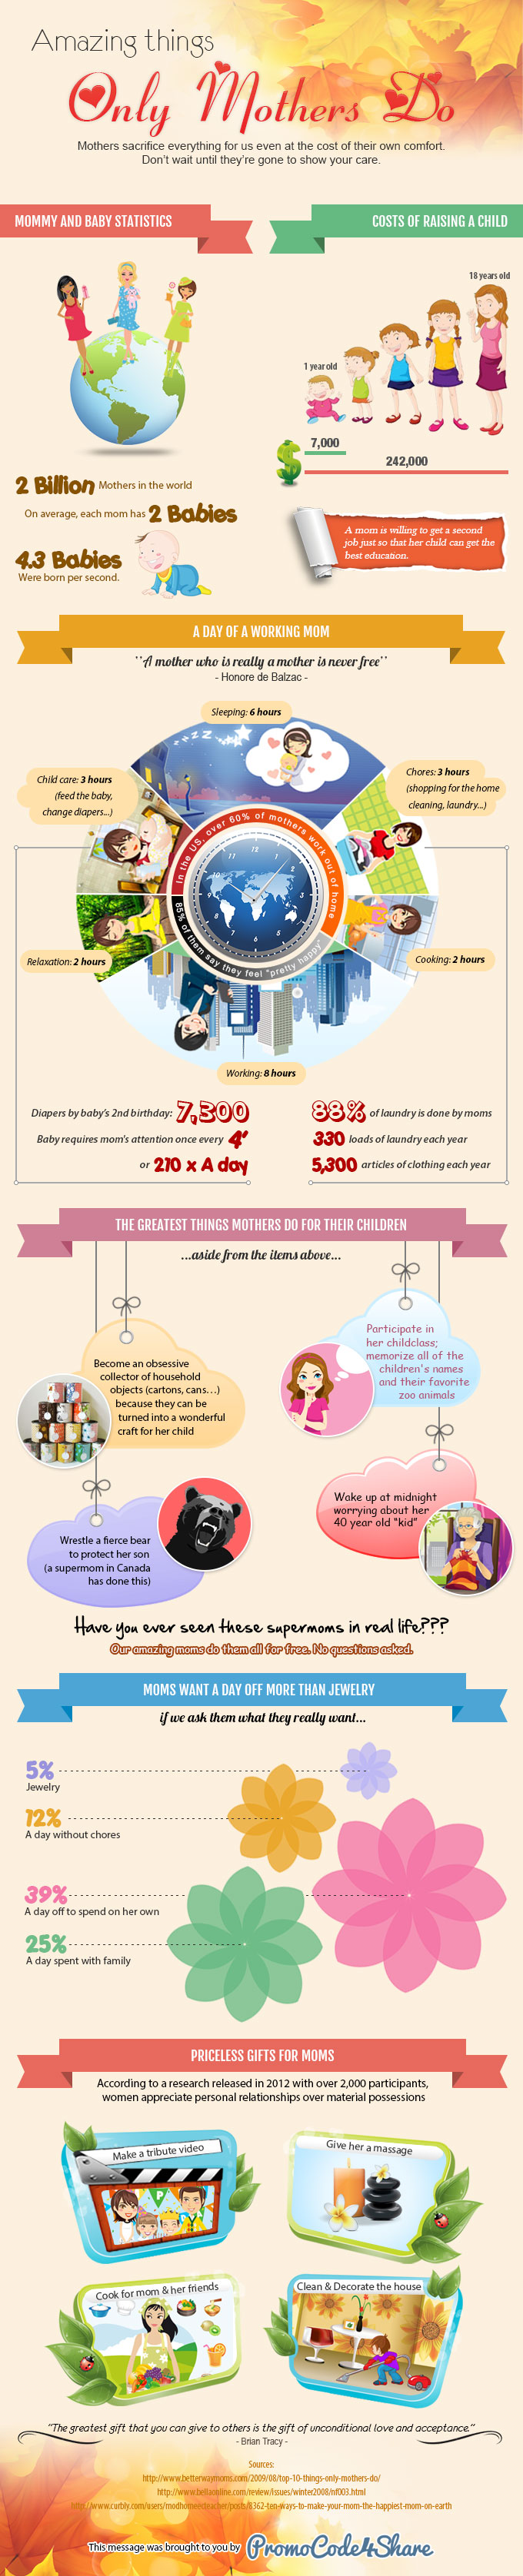 Amazing things only mothers do [Infographic]